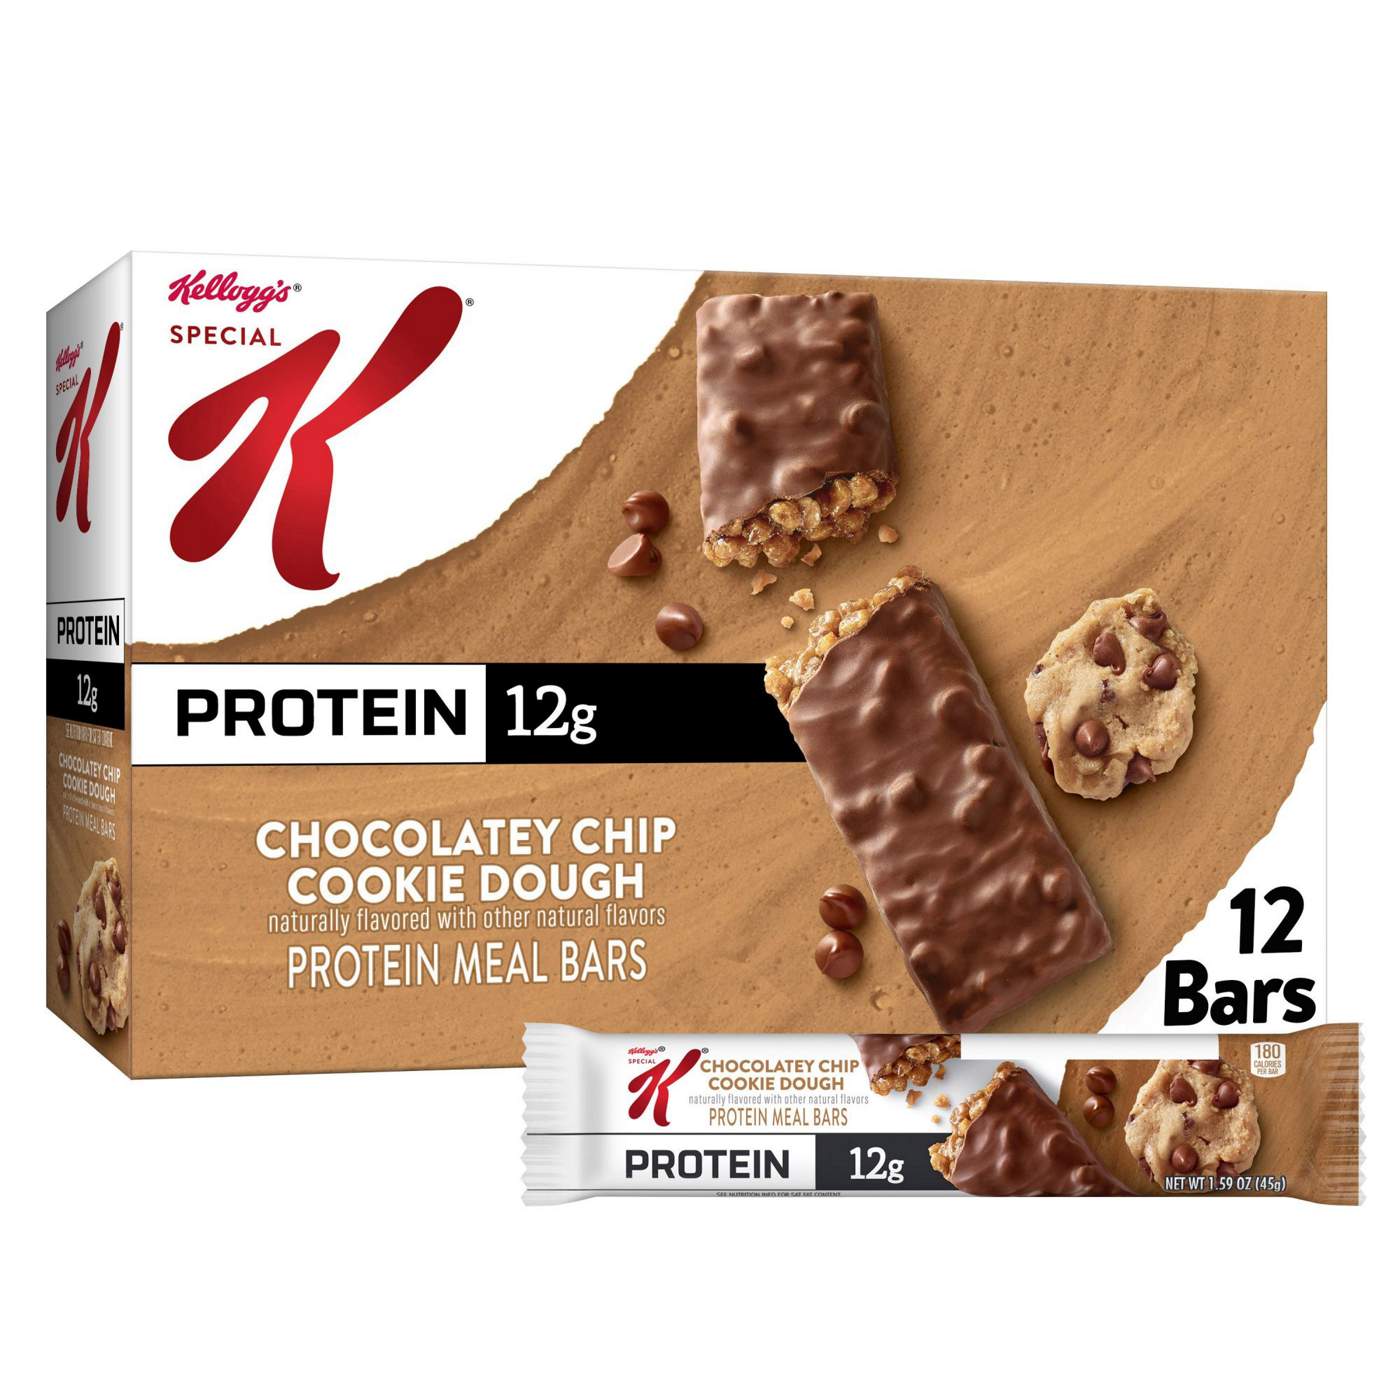 Kellogg's Special K Chocolatey Chip Cookie Dough Protein Meal Bars; image 4 of 4